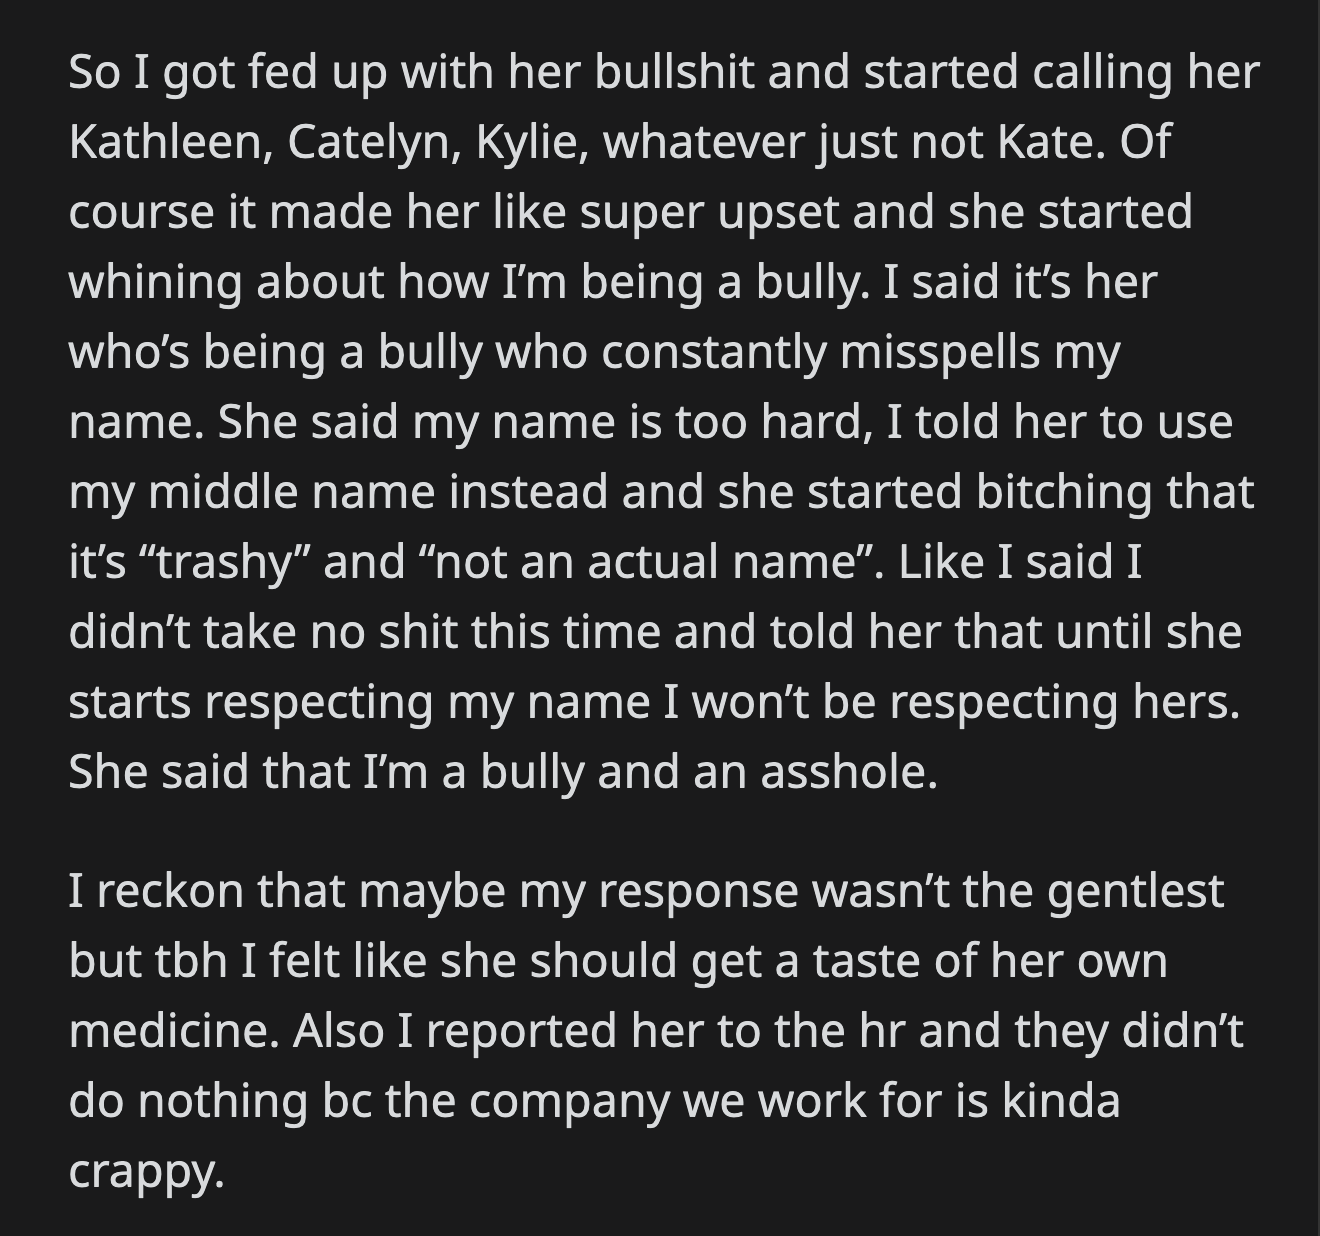 OP informed Kate that she wouldn't use the correct name to talk to her until she respected her name. OP also filed a complaint to HR, but the report went nowhere.